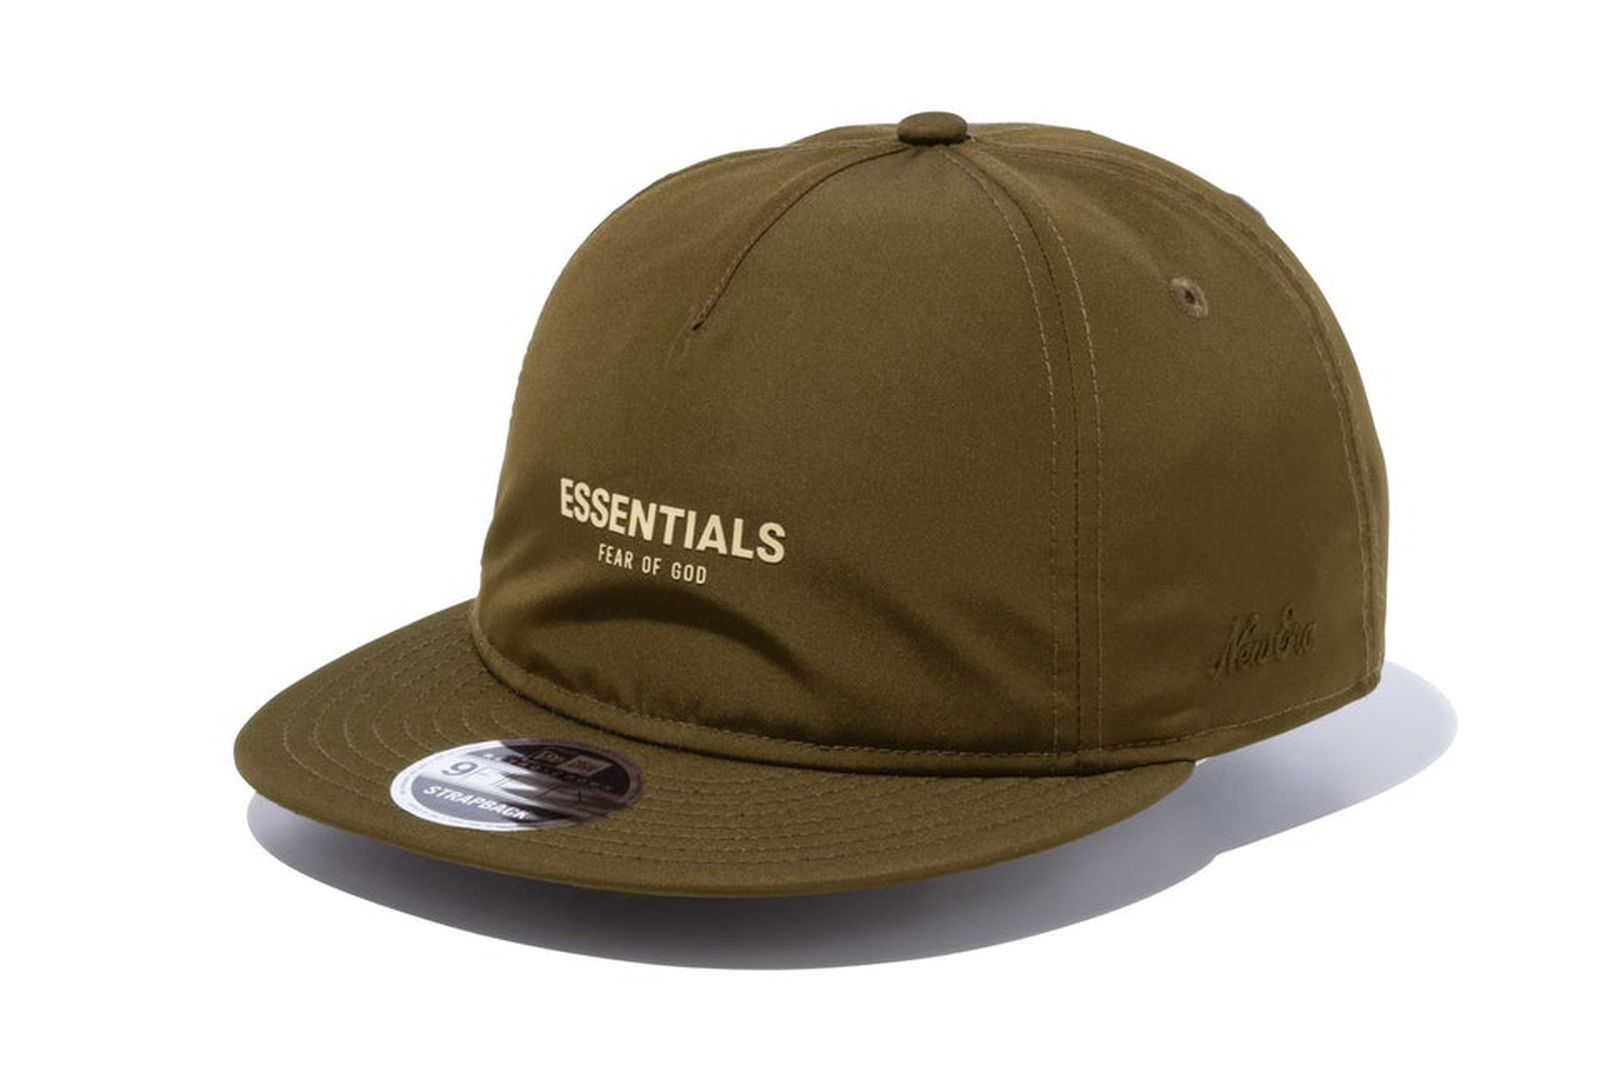 Fear of God & ESSENTIALS x New Era Collab Is Back for SS22